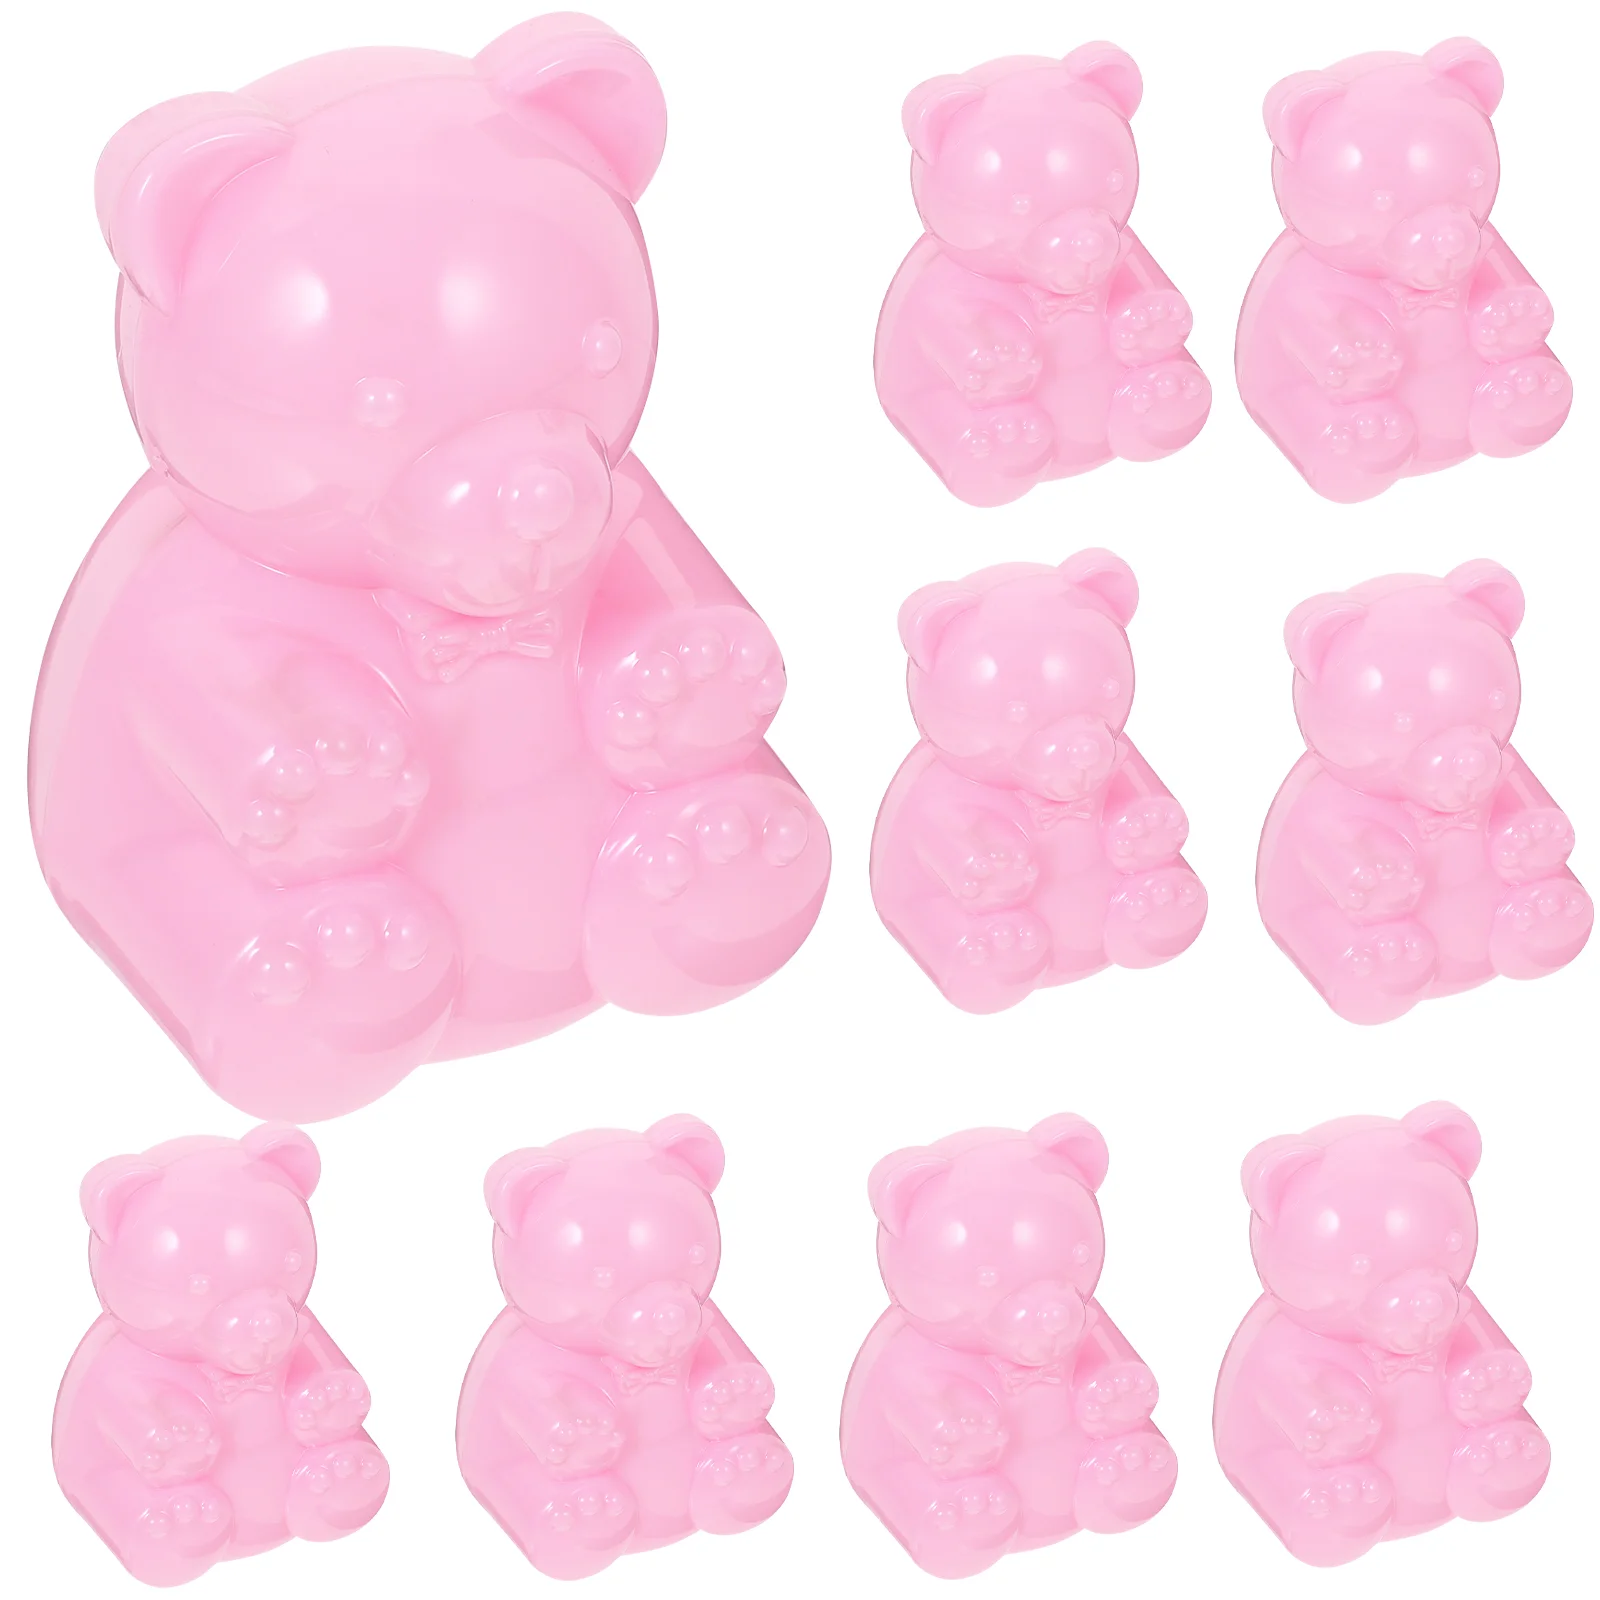 

12 Pcs Transparent Candy Box Party Treats Containers Gift Adorable Bear Cases Small Ps Wedding Shape